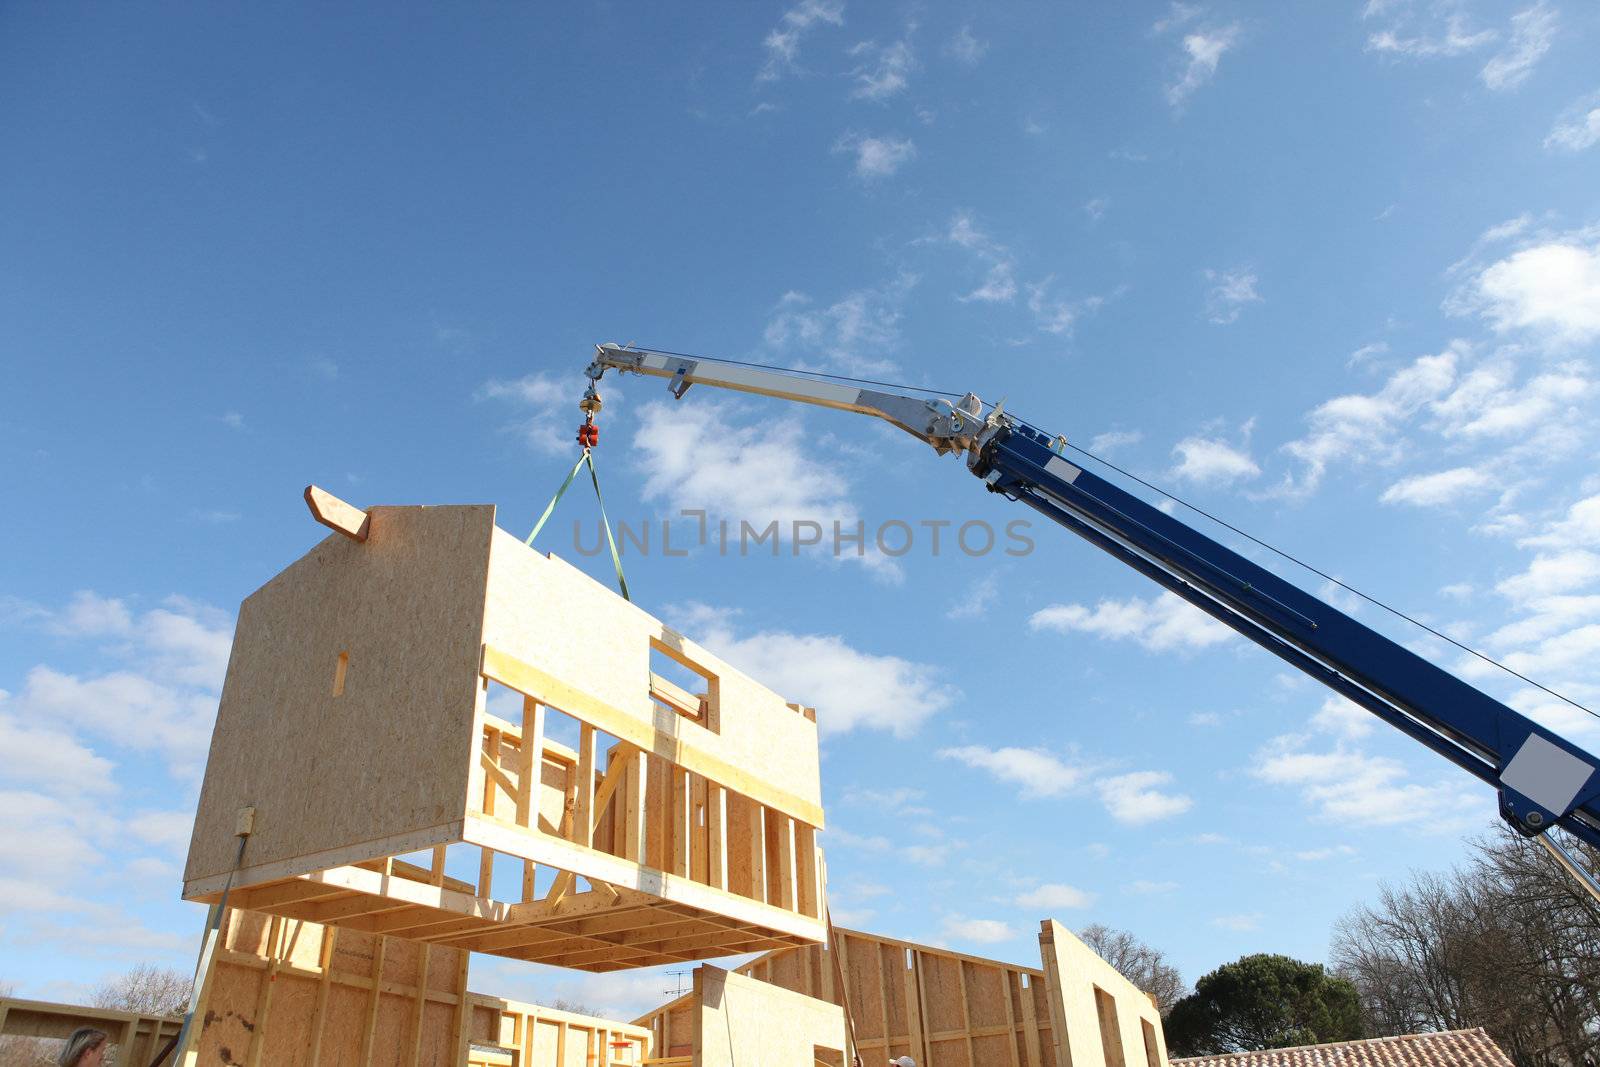 Crane lifting the framework of a house by phovoir